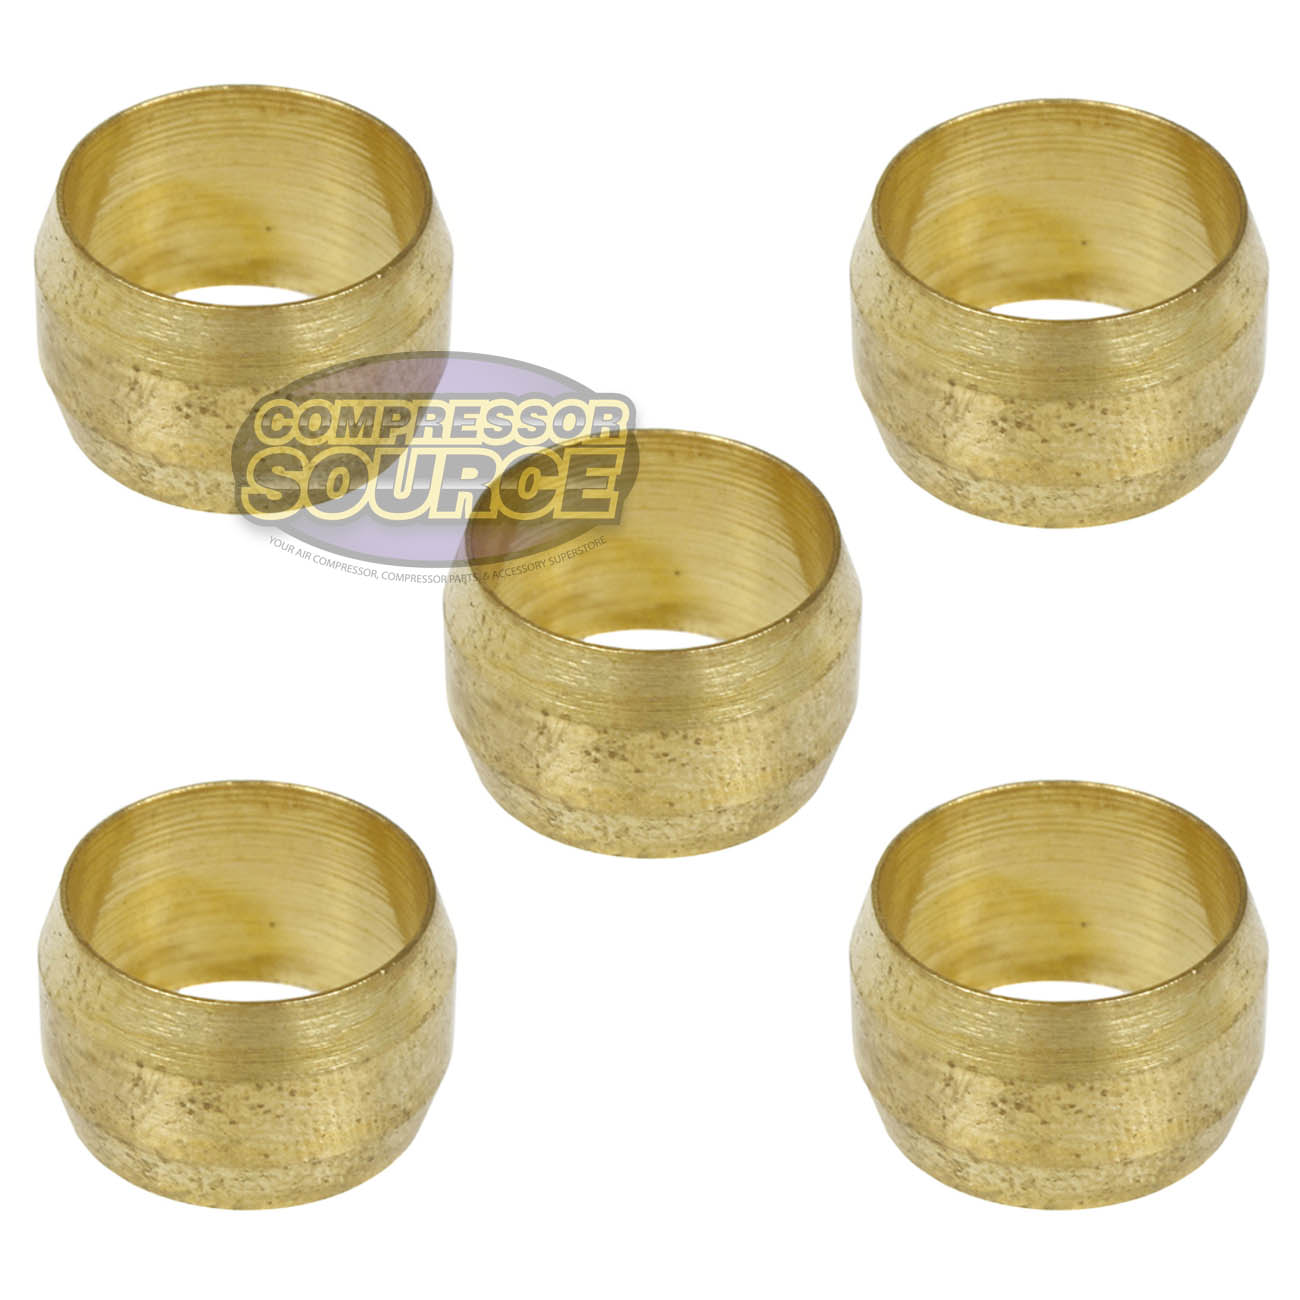 5 Pack 1/2" Compression Sleeve Solid Brass Ferrule for 1/2" Compression Tubing